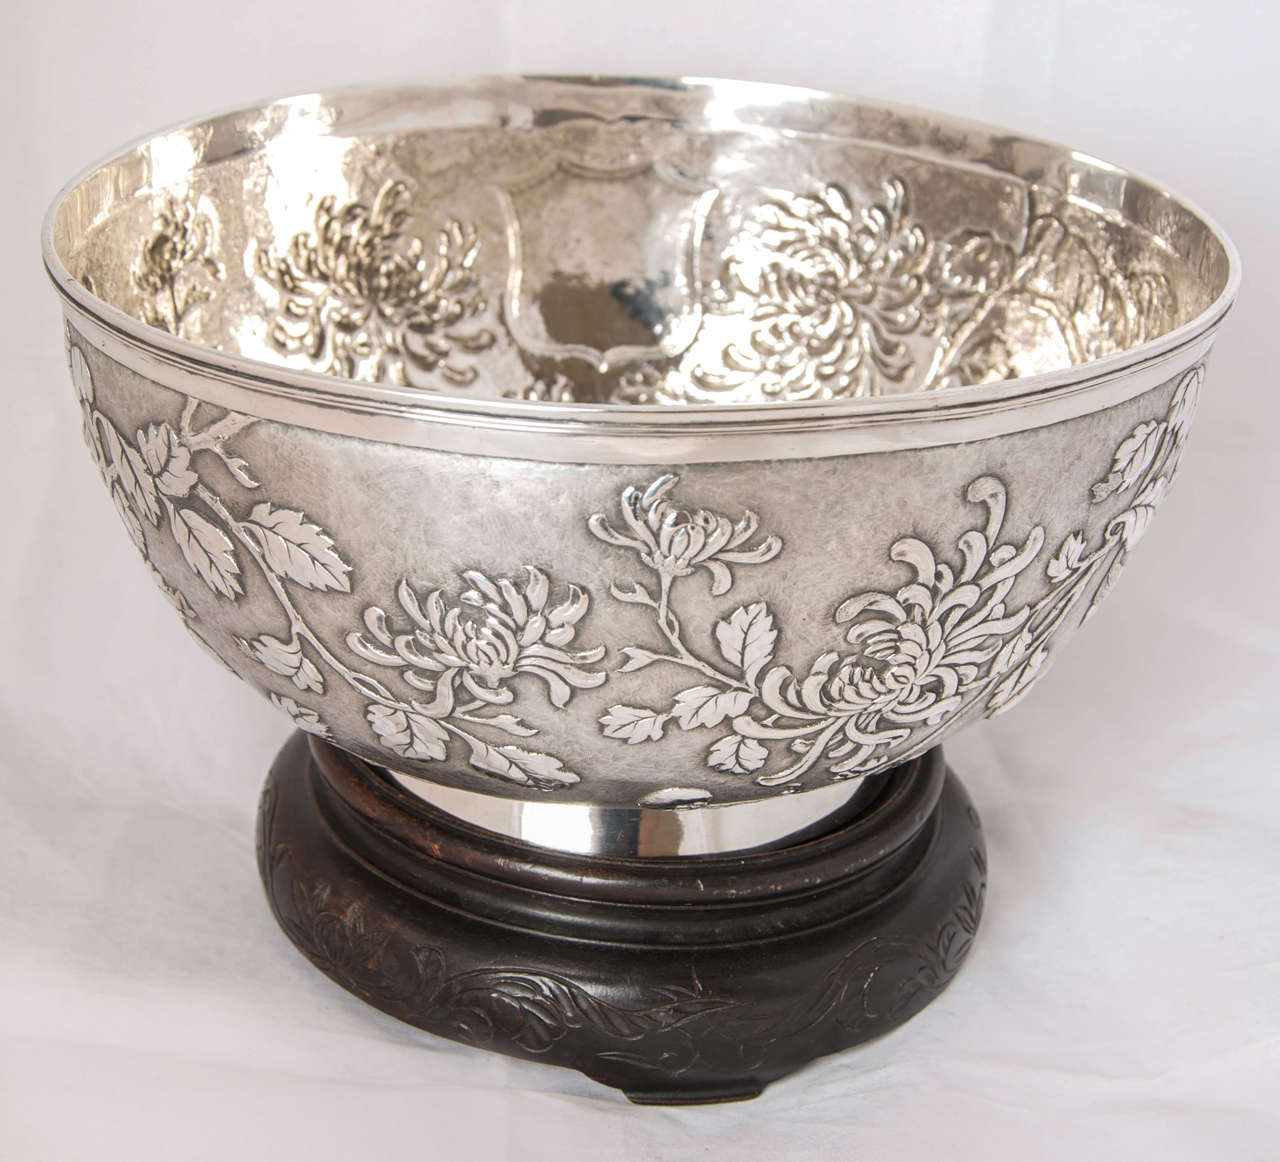 A large Chinese export silver bowl with chrysanthemum decoration on a matte background. It was made by Hung Chong of Canton or Shanghai, circa 1895.
The bowl sits on a wood stand.
Measure: Diameter is 25.5 cms.
Weight of silver 1020 gms.